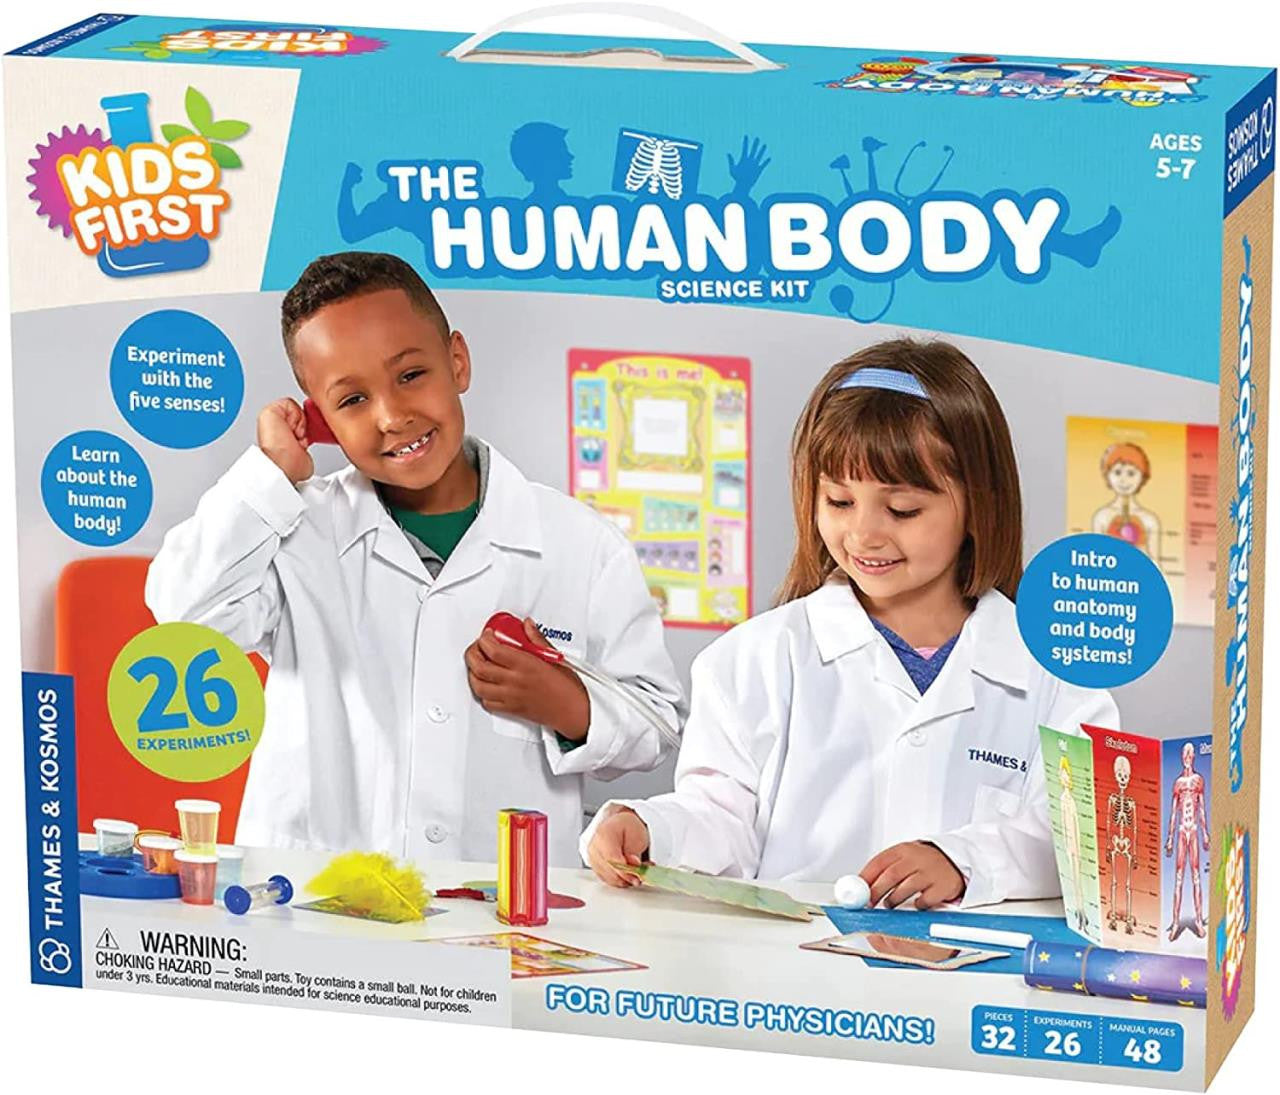 Kids First: The Human Body